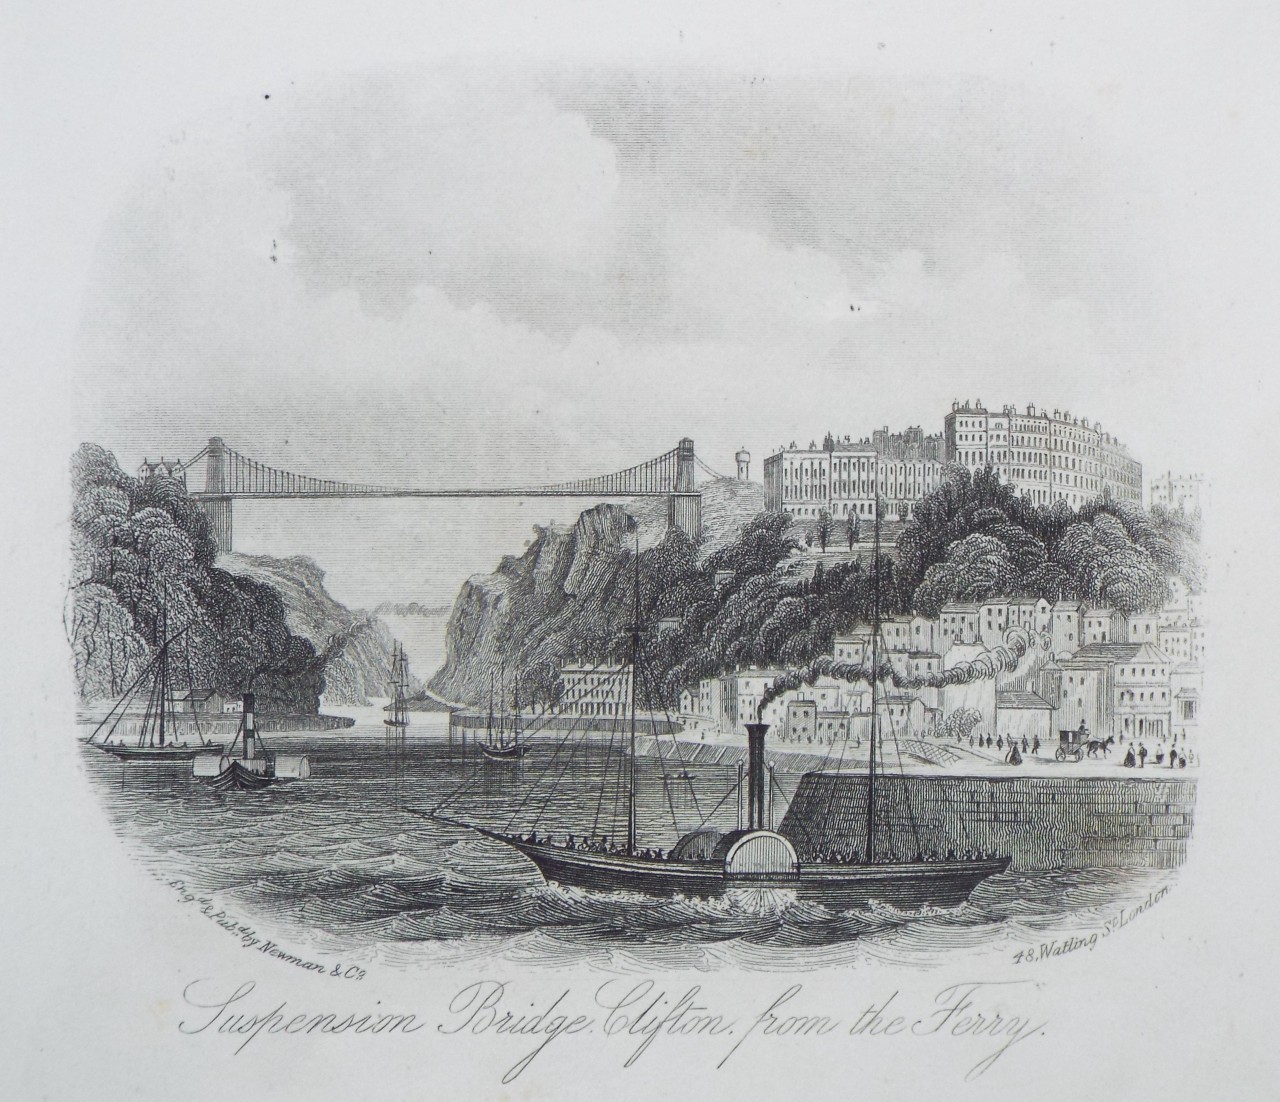 Steel Vignette - Suspension Bridge, Clifton, from the Ferry. - Newman